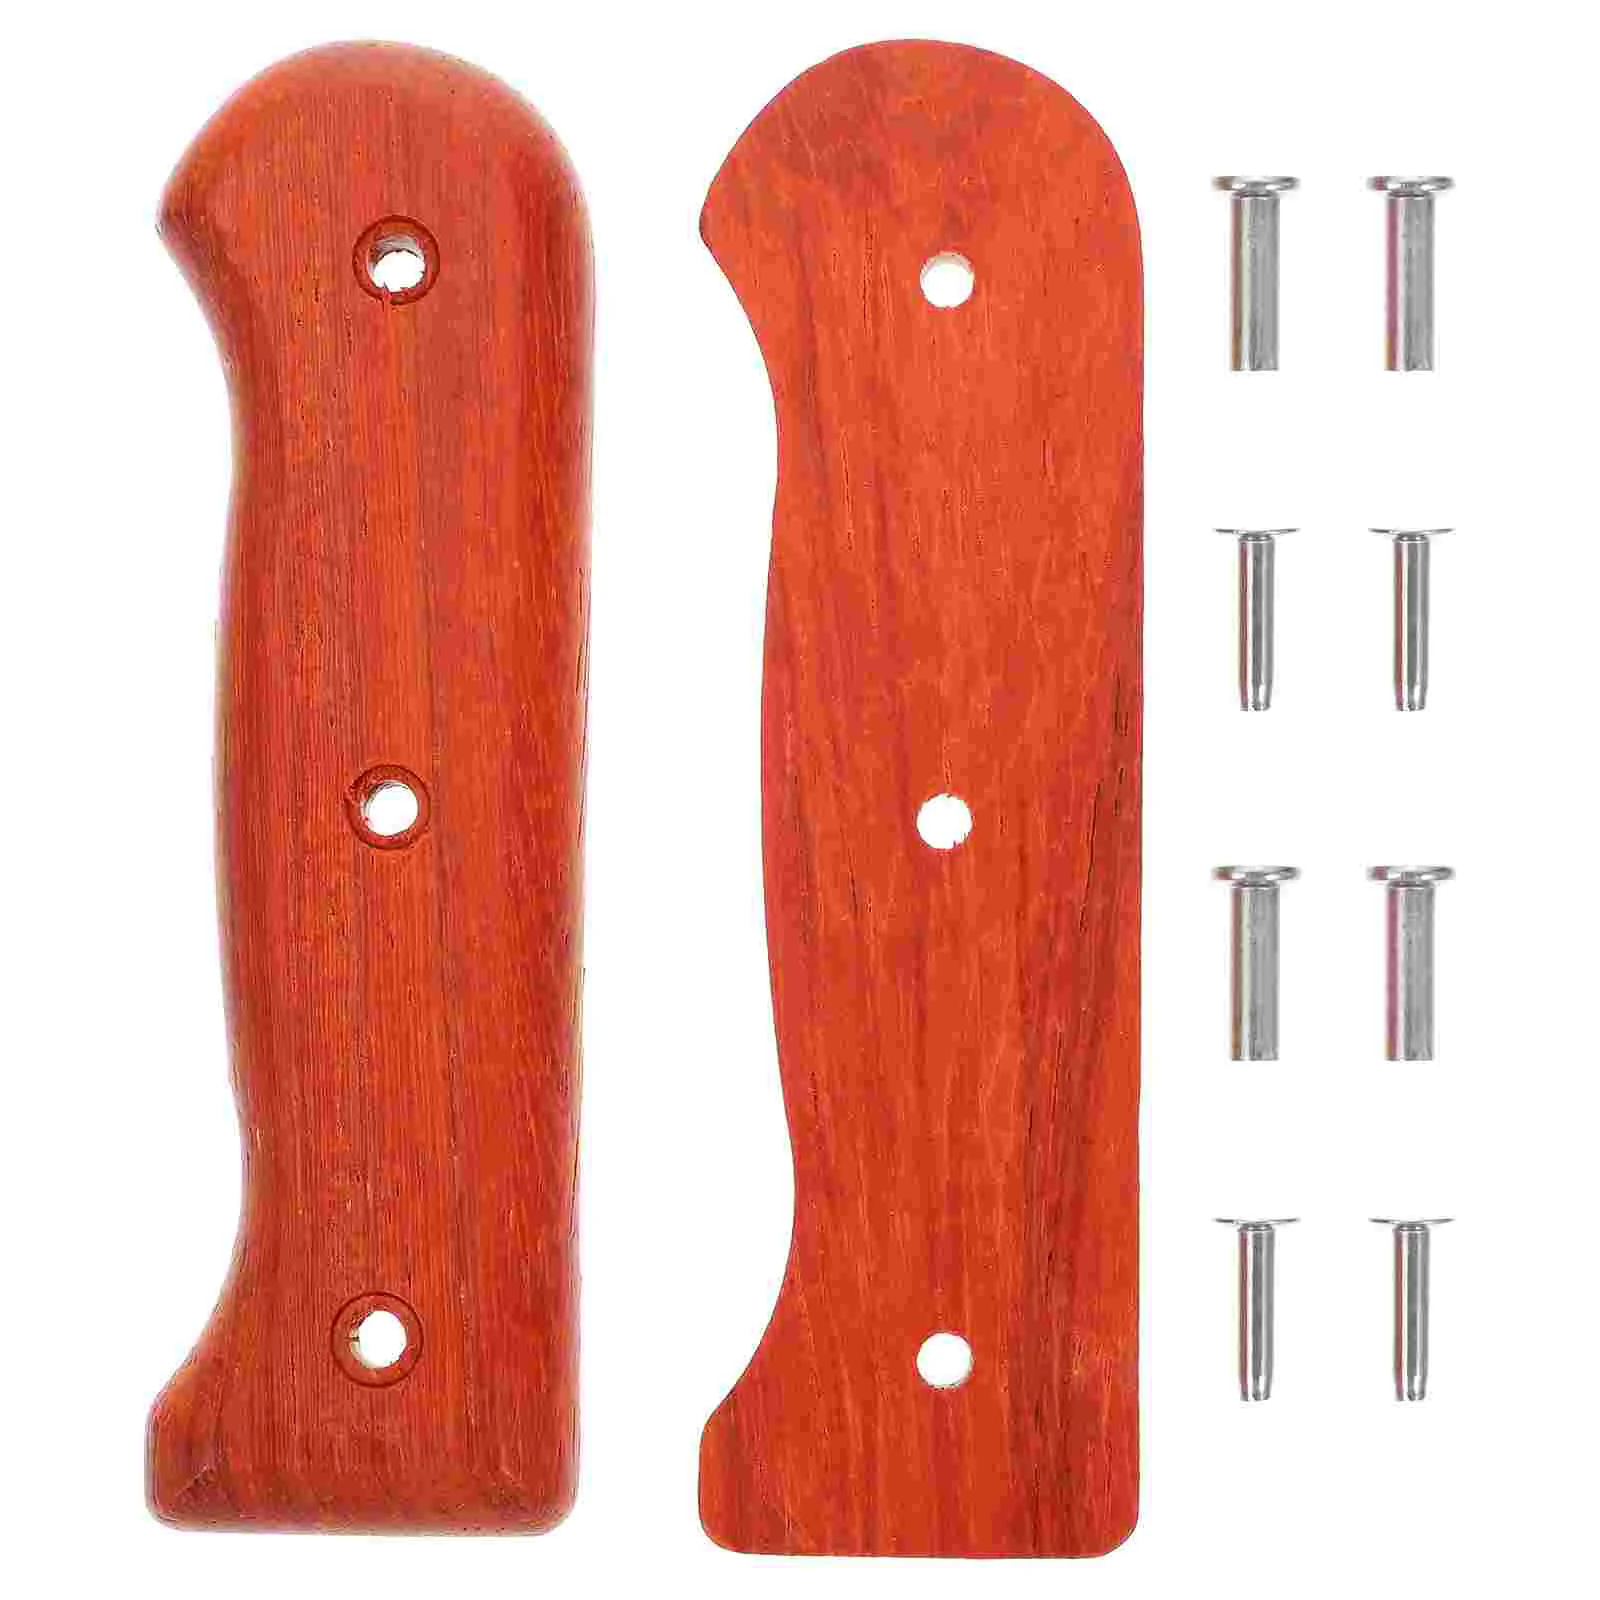 

Handle Grip Kitchen Replacement Handles Wood Wooden Hand Accessories Chopping Chef Making Parts Repair Grips Scales Fittings Pot